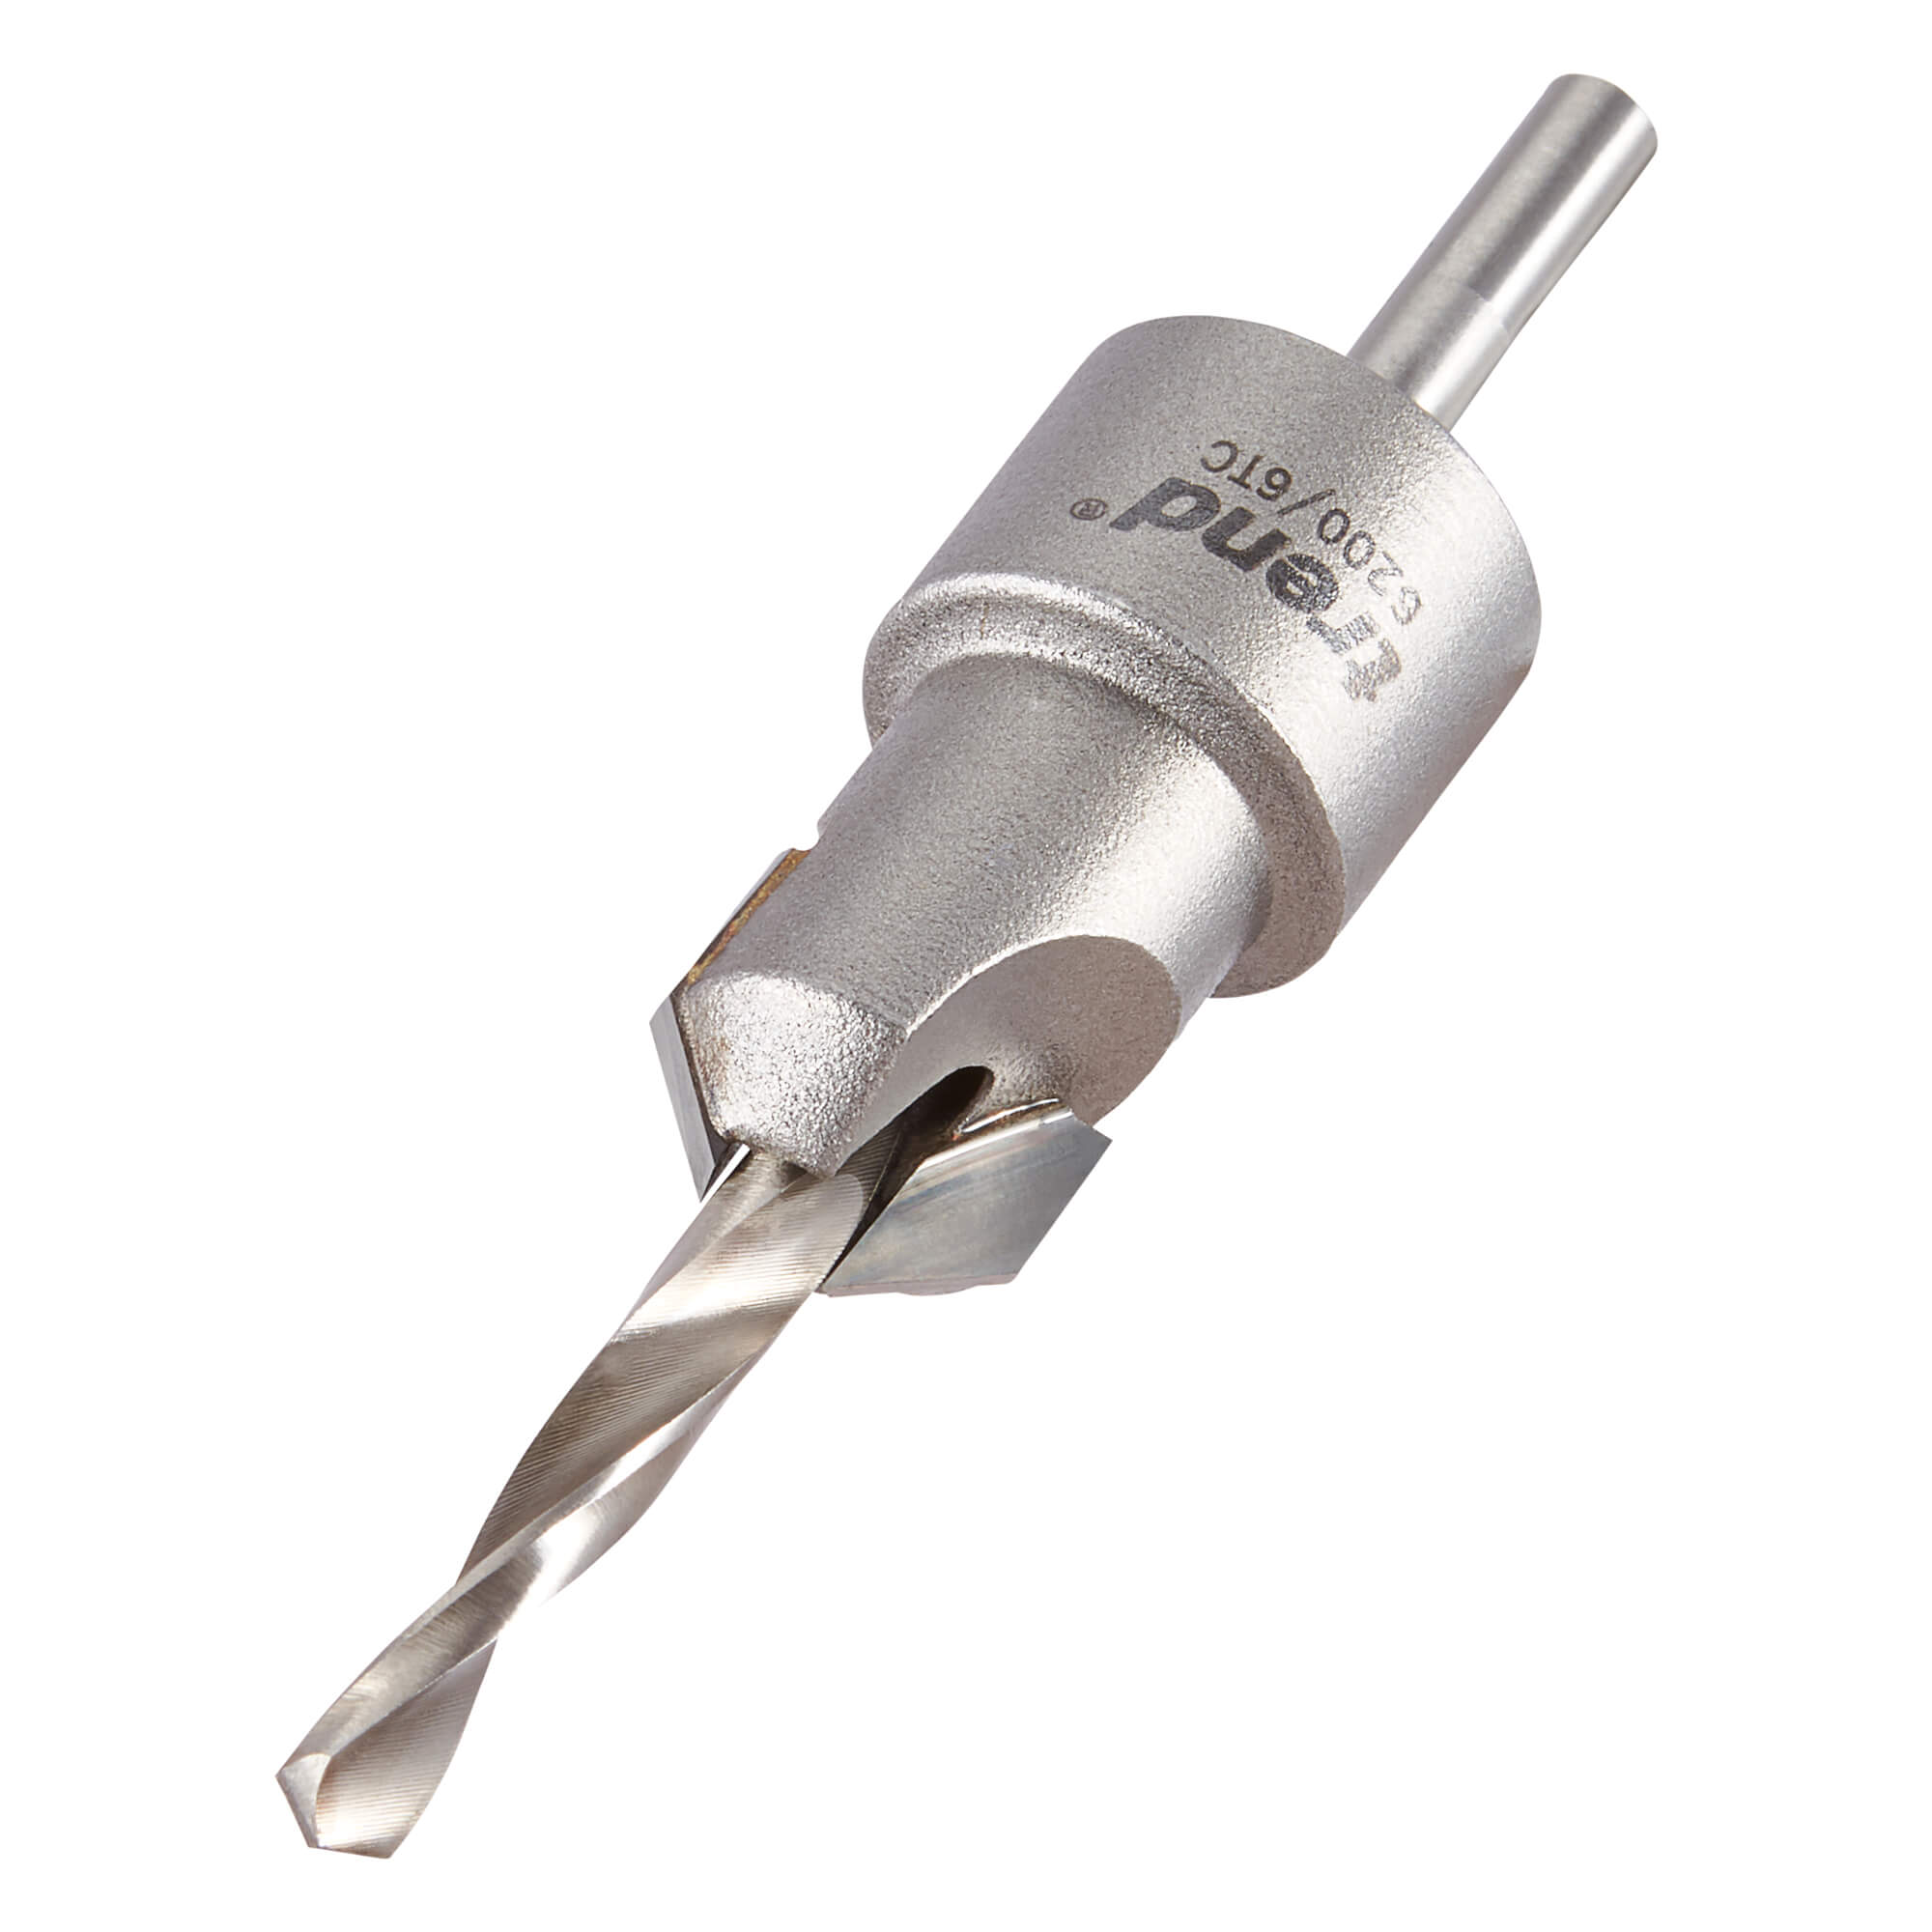 Image of Trend TCT Drill Countersink Size 6 1/2"